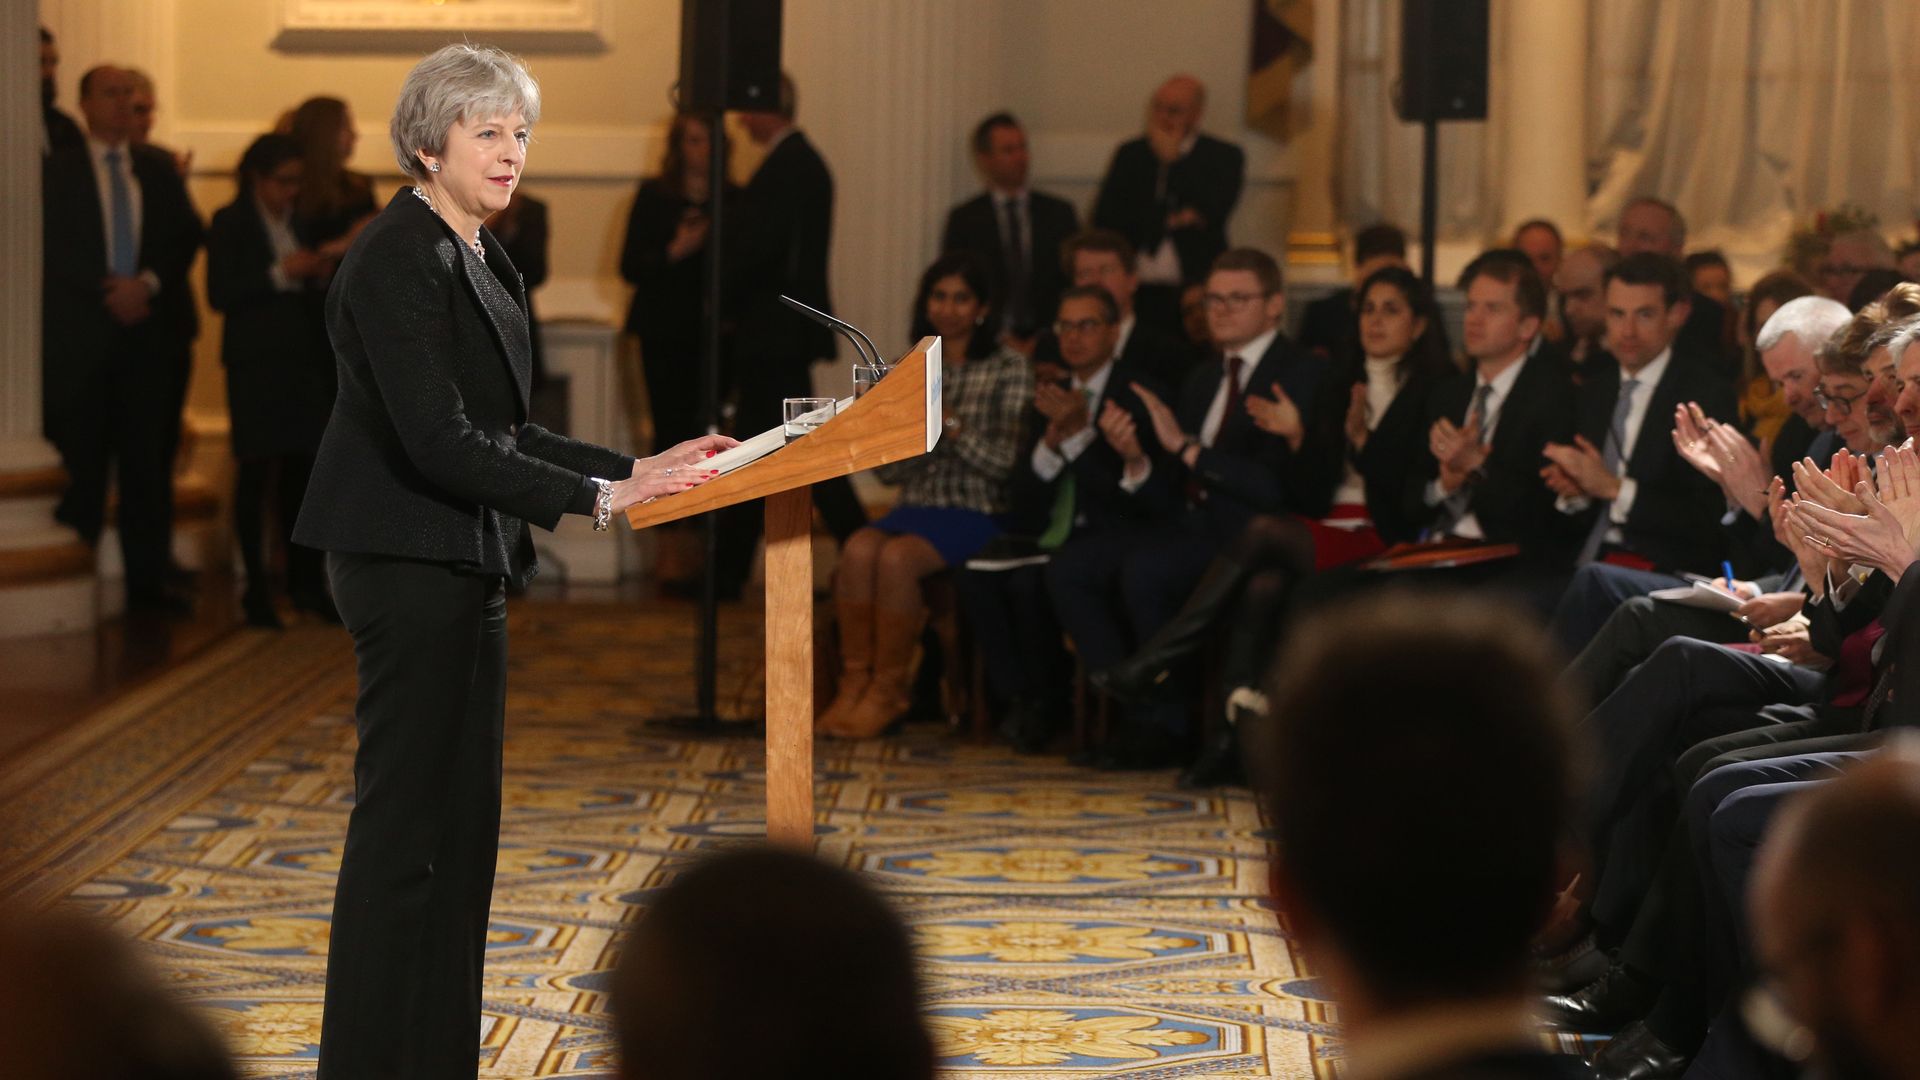 British Prime Minister Theresa May delivers her latest Brexit speech at Mansion House on March 2, 2018, in London, England.